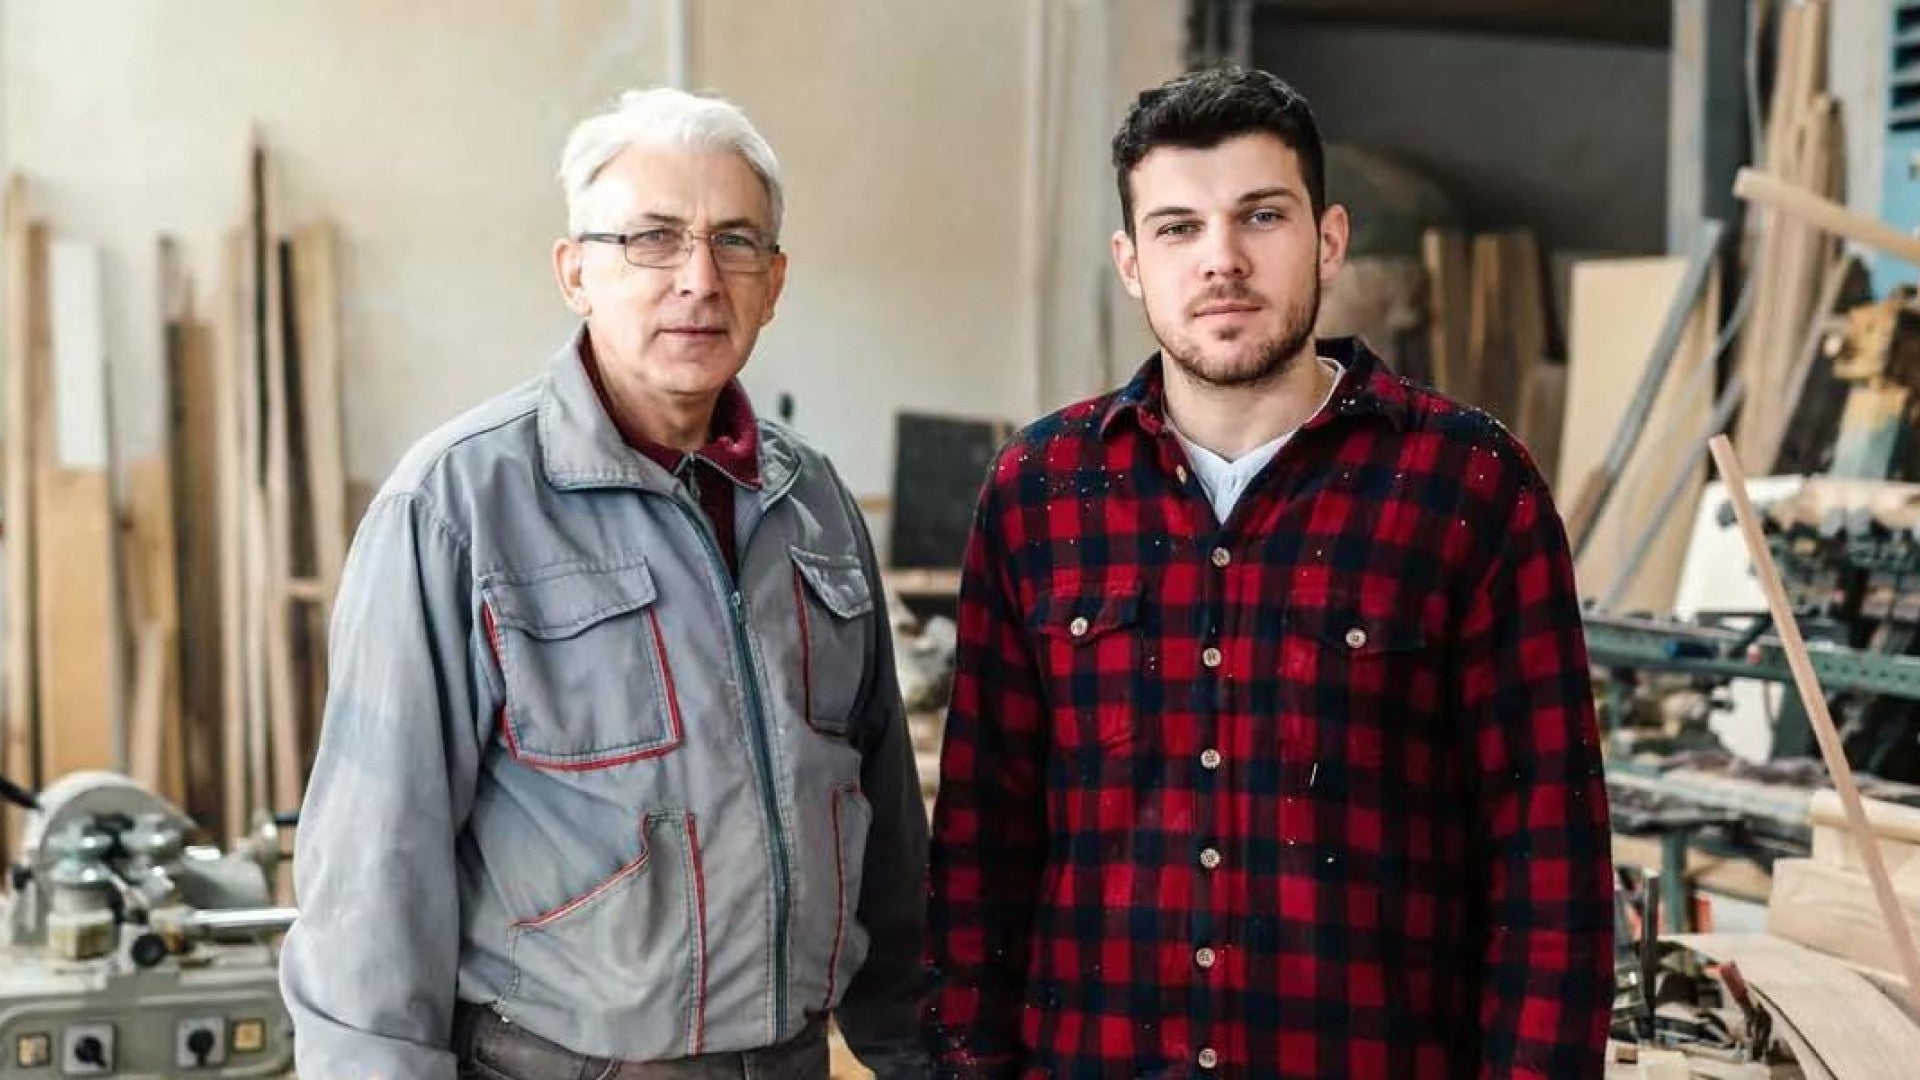 A business owner and his son standing in their production facility.